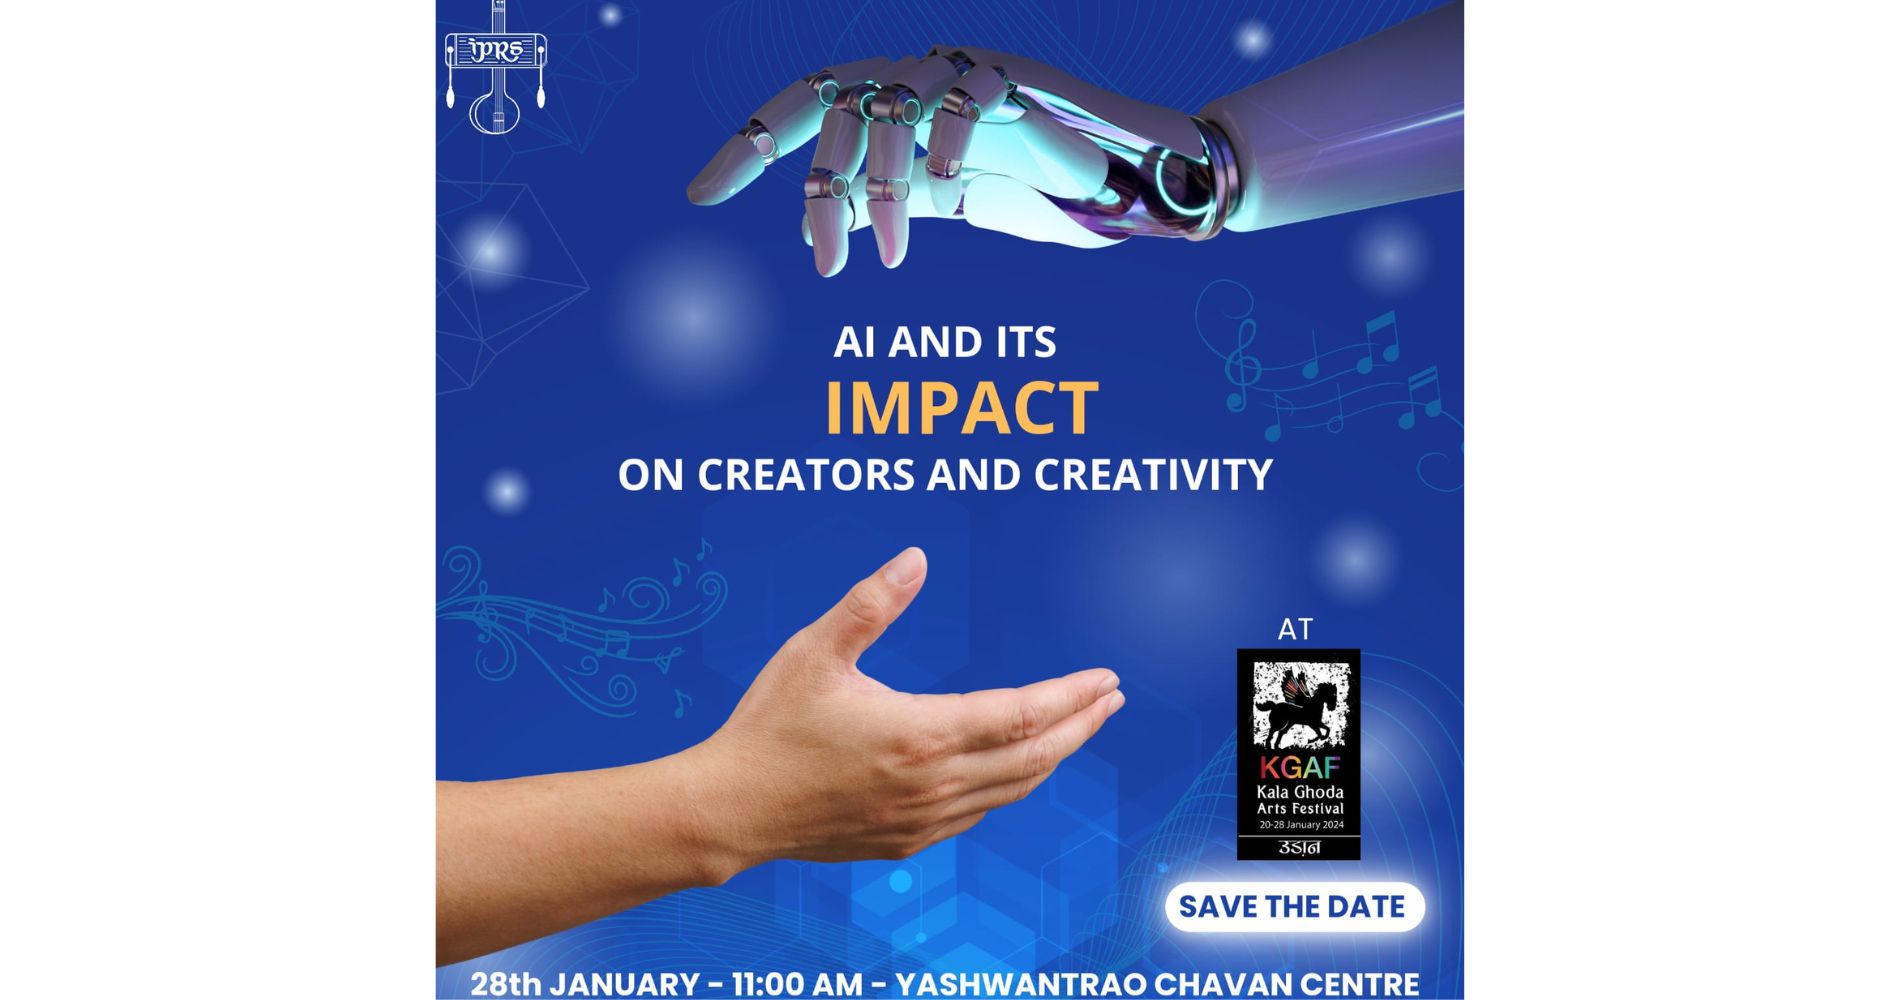 IPRS Hosts Enlightening Session On AI's Creative Impact